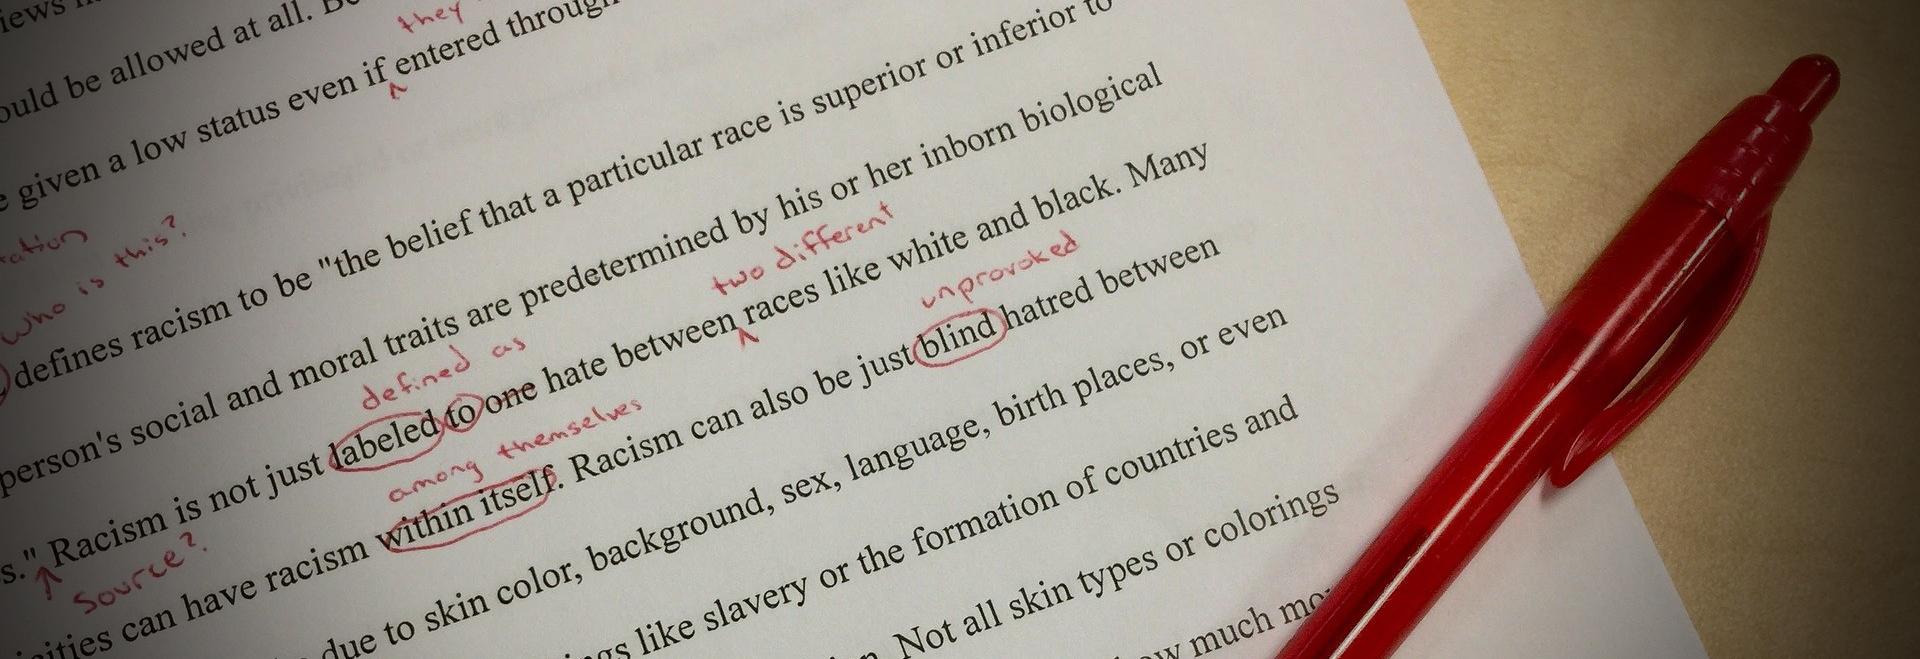 A student paper about race is marked up with red ink corrections.